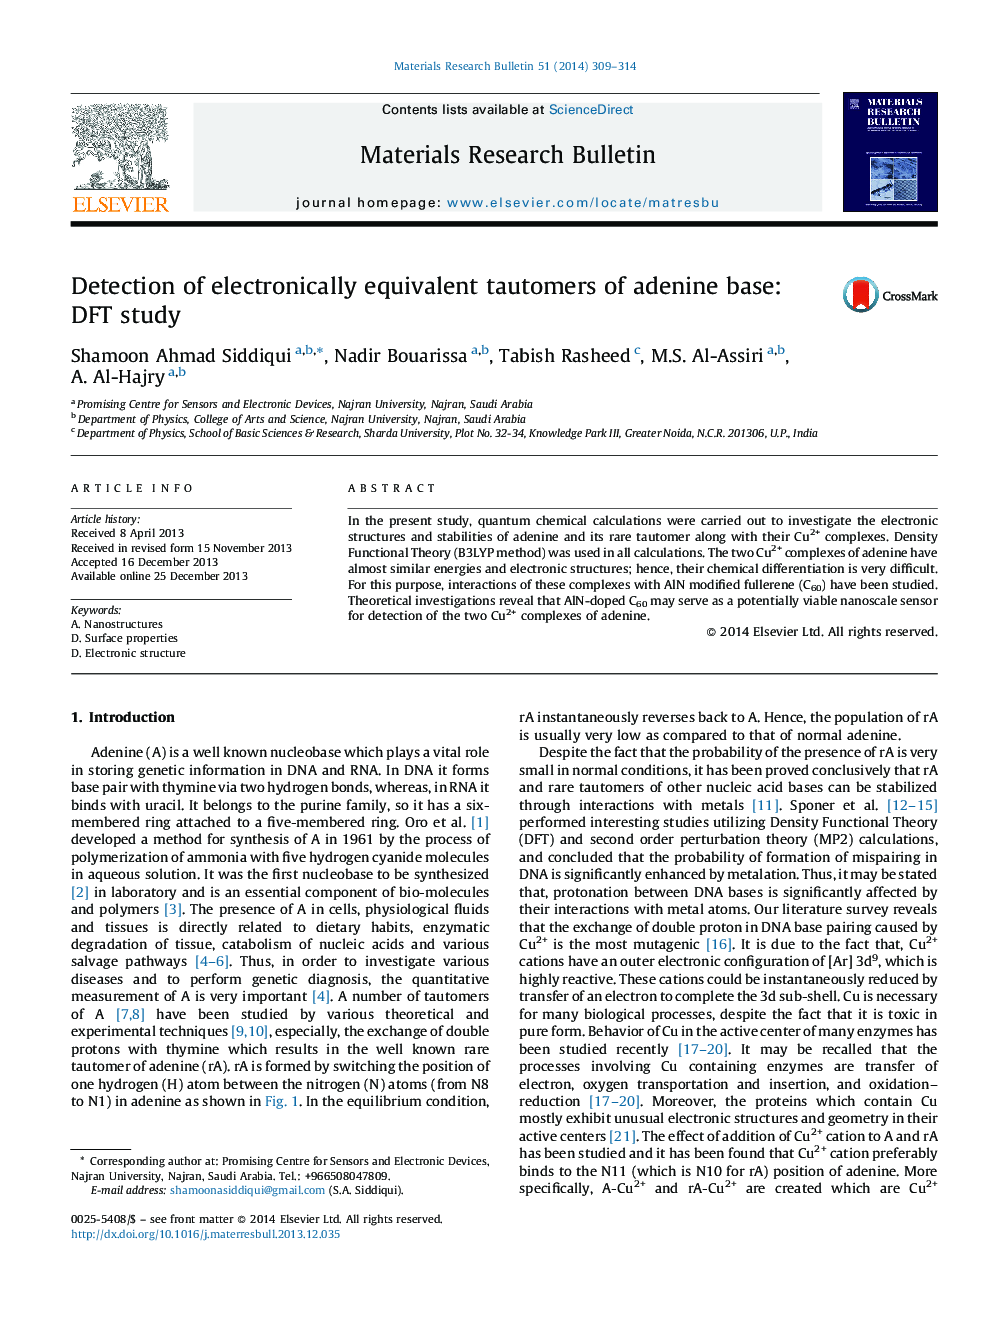 Detection of electronically equivalent tautomers of adenine base: DFT study